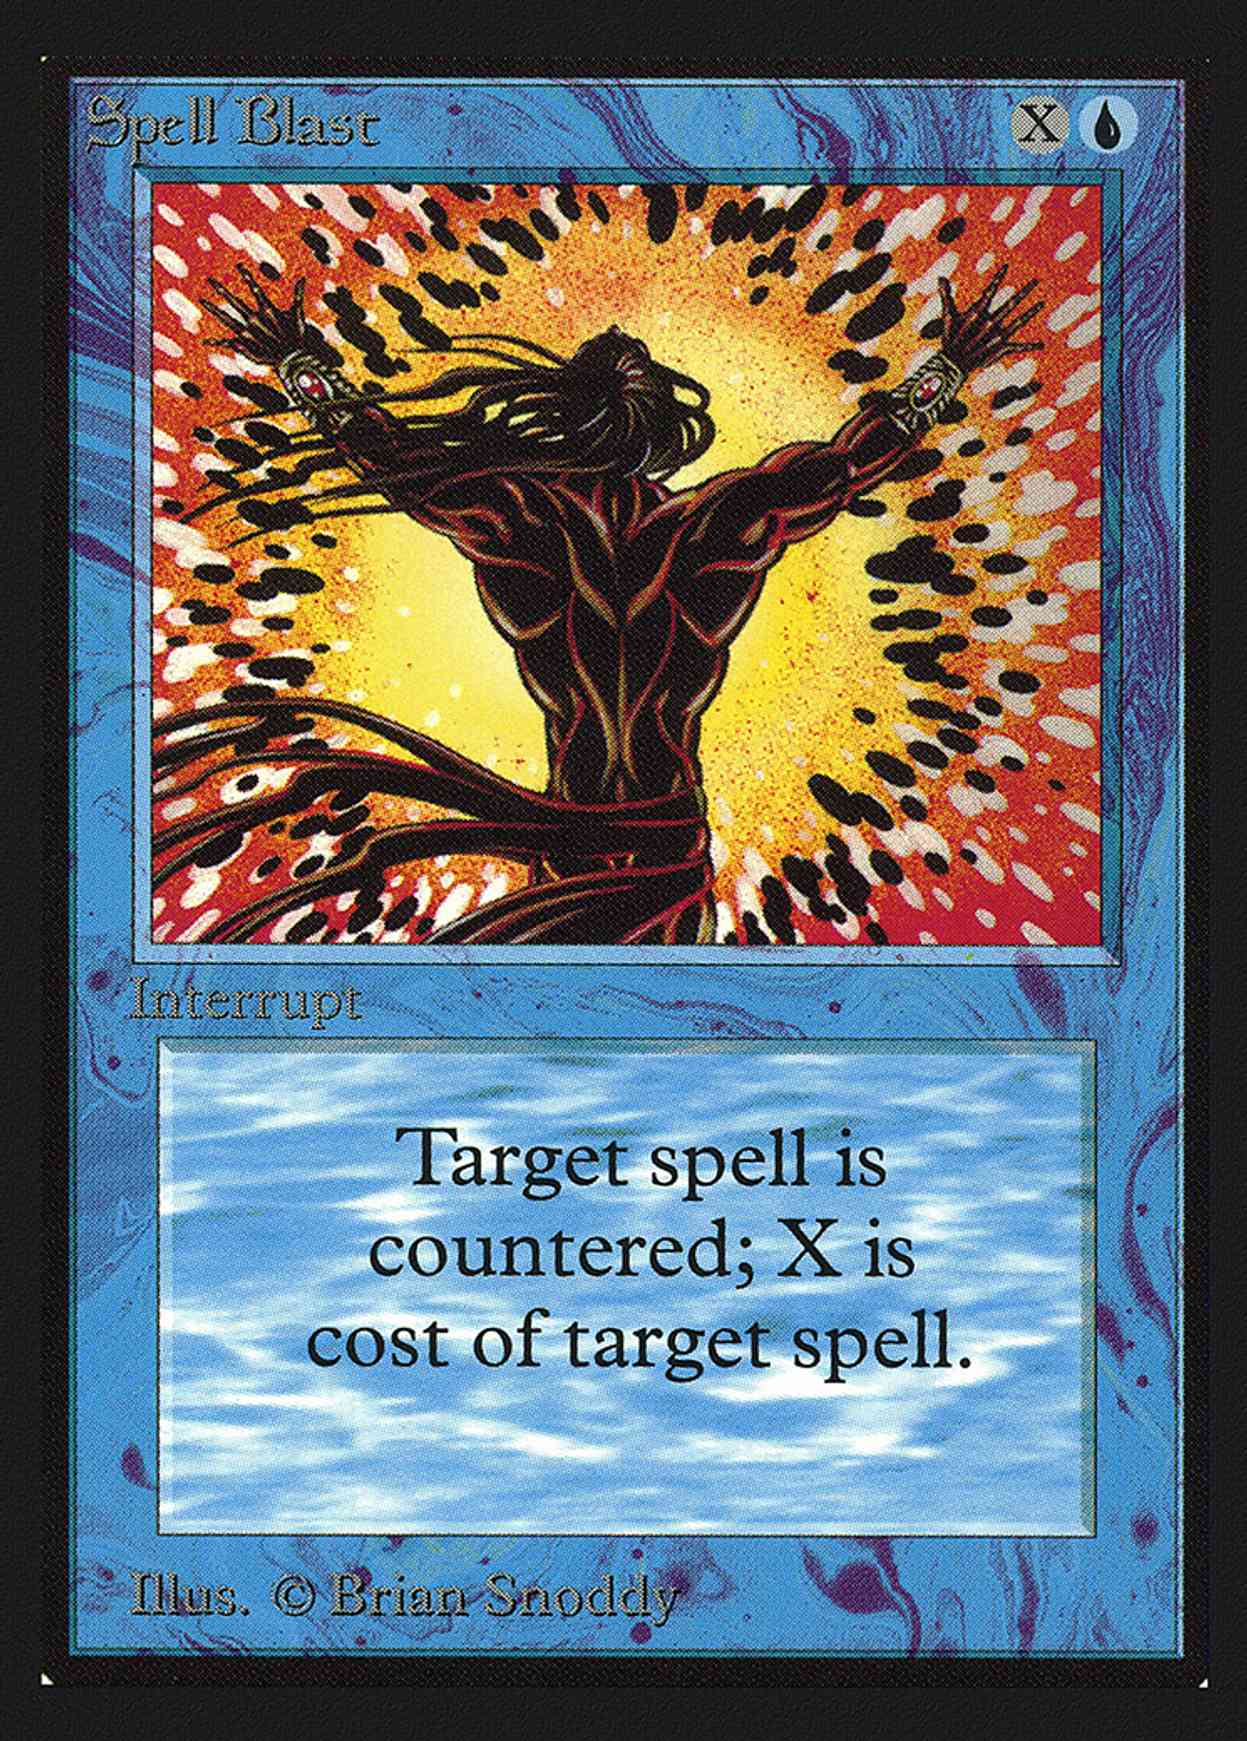 Spell Blast (IE) magic card front